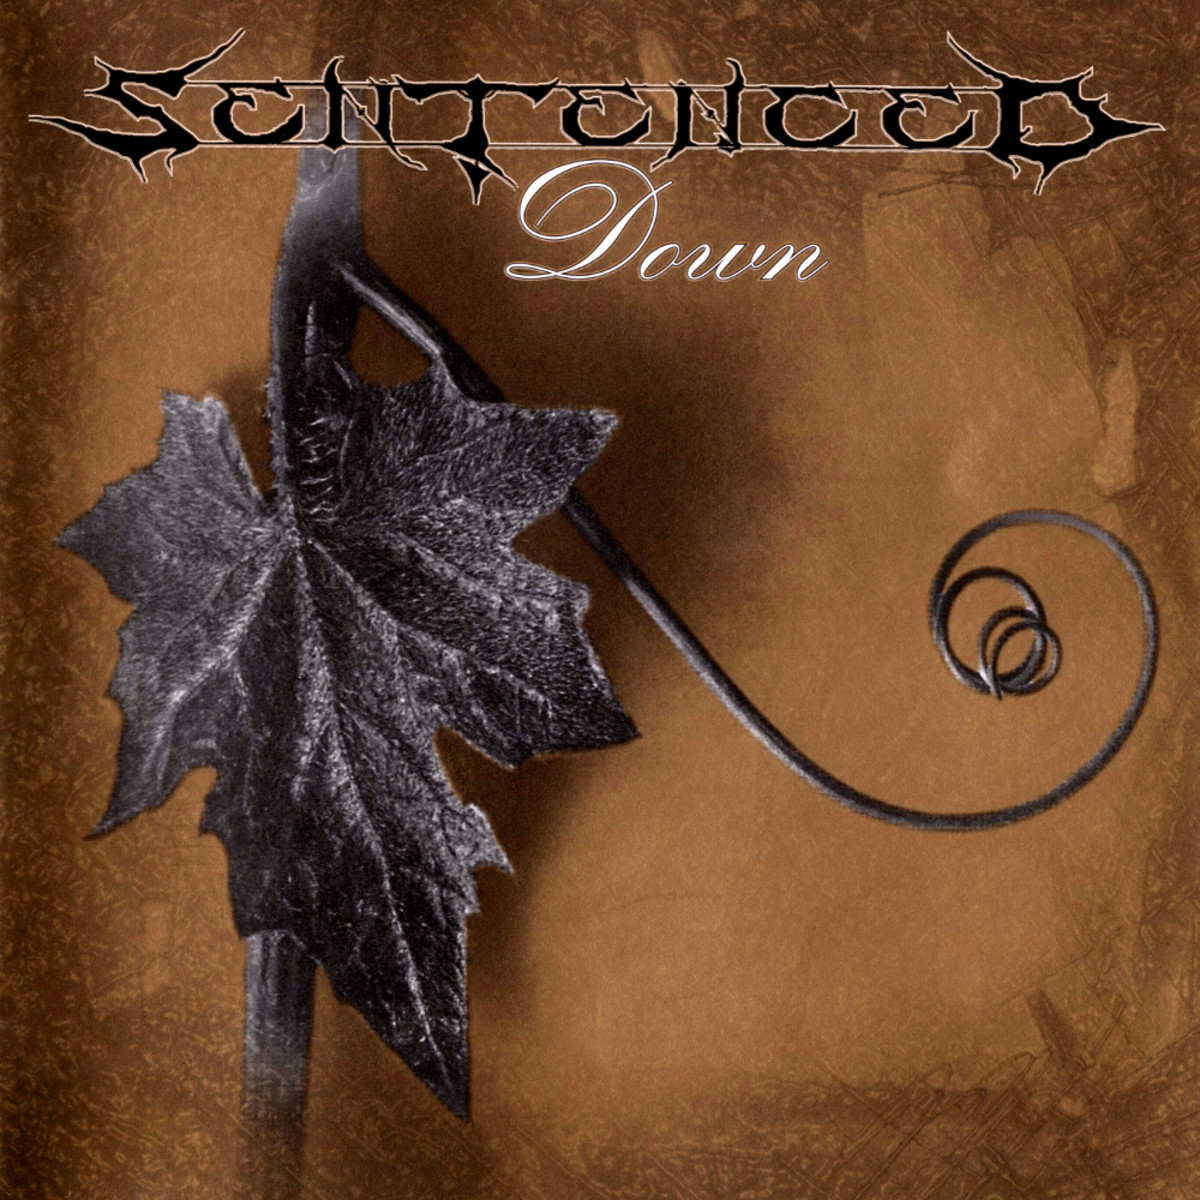 The album's cover has a leaf on top of a sword that is pointed downwards. Even though the lyrical themes on the album are of a somber mood, the musical skill is still there.